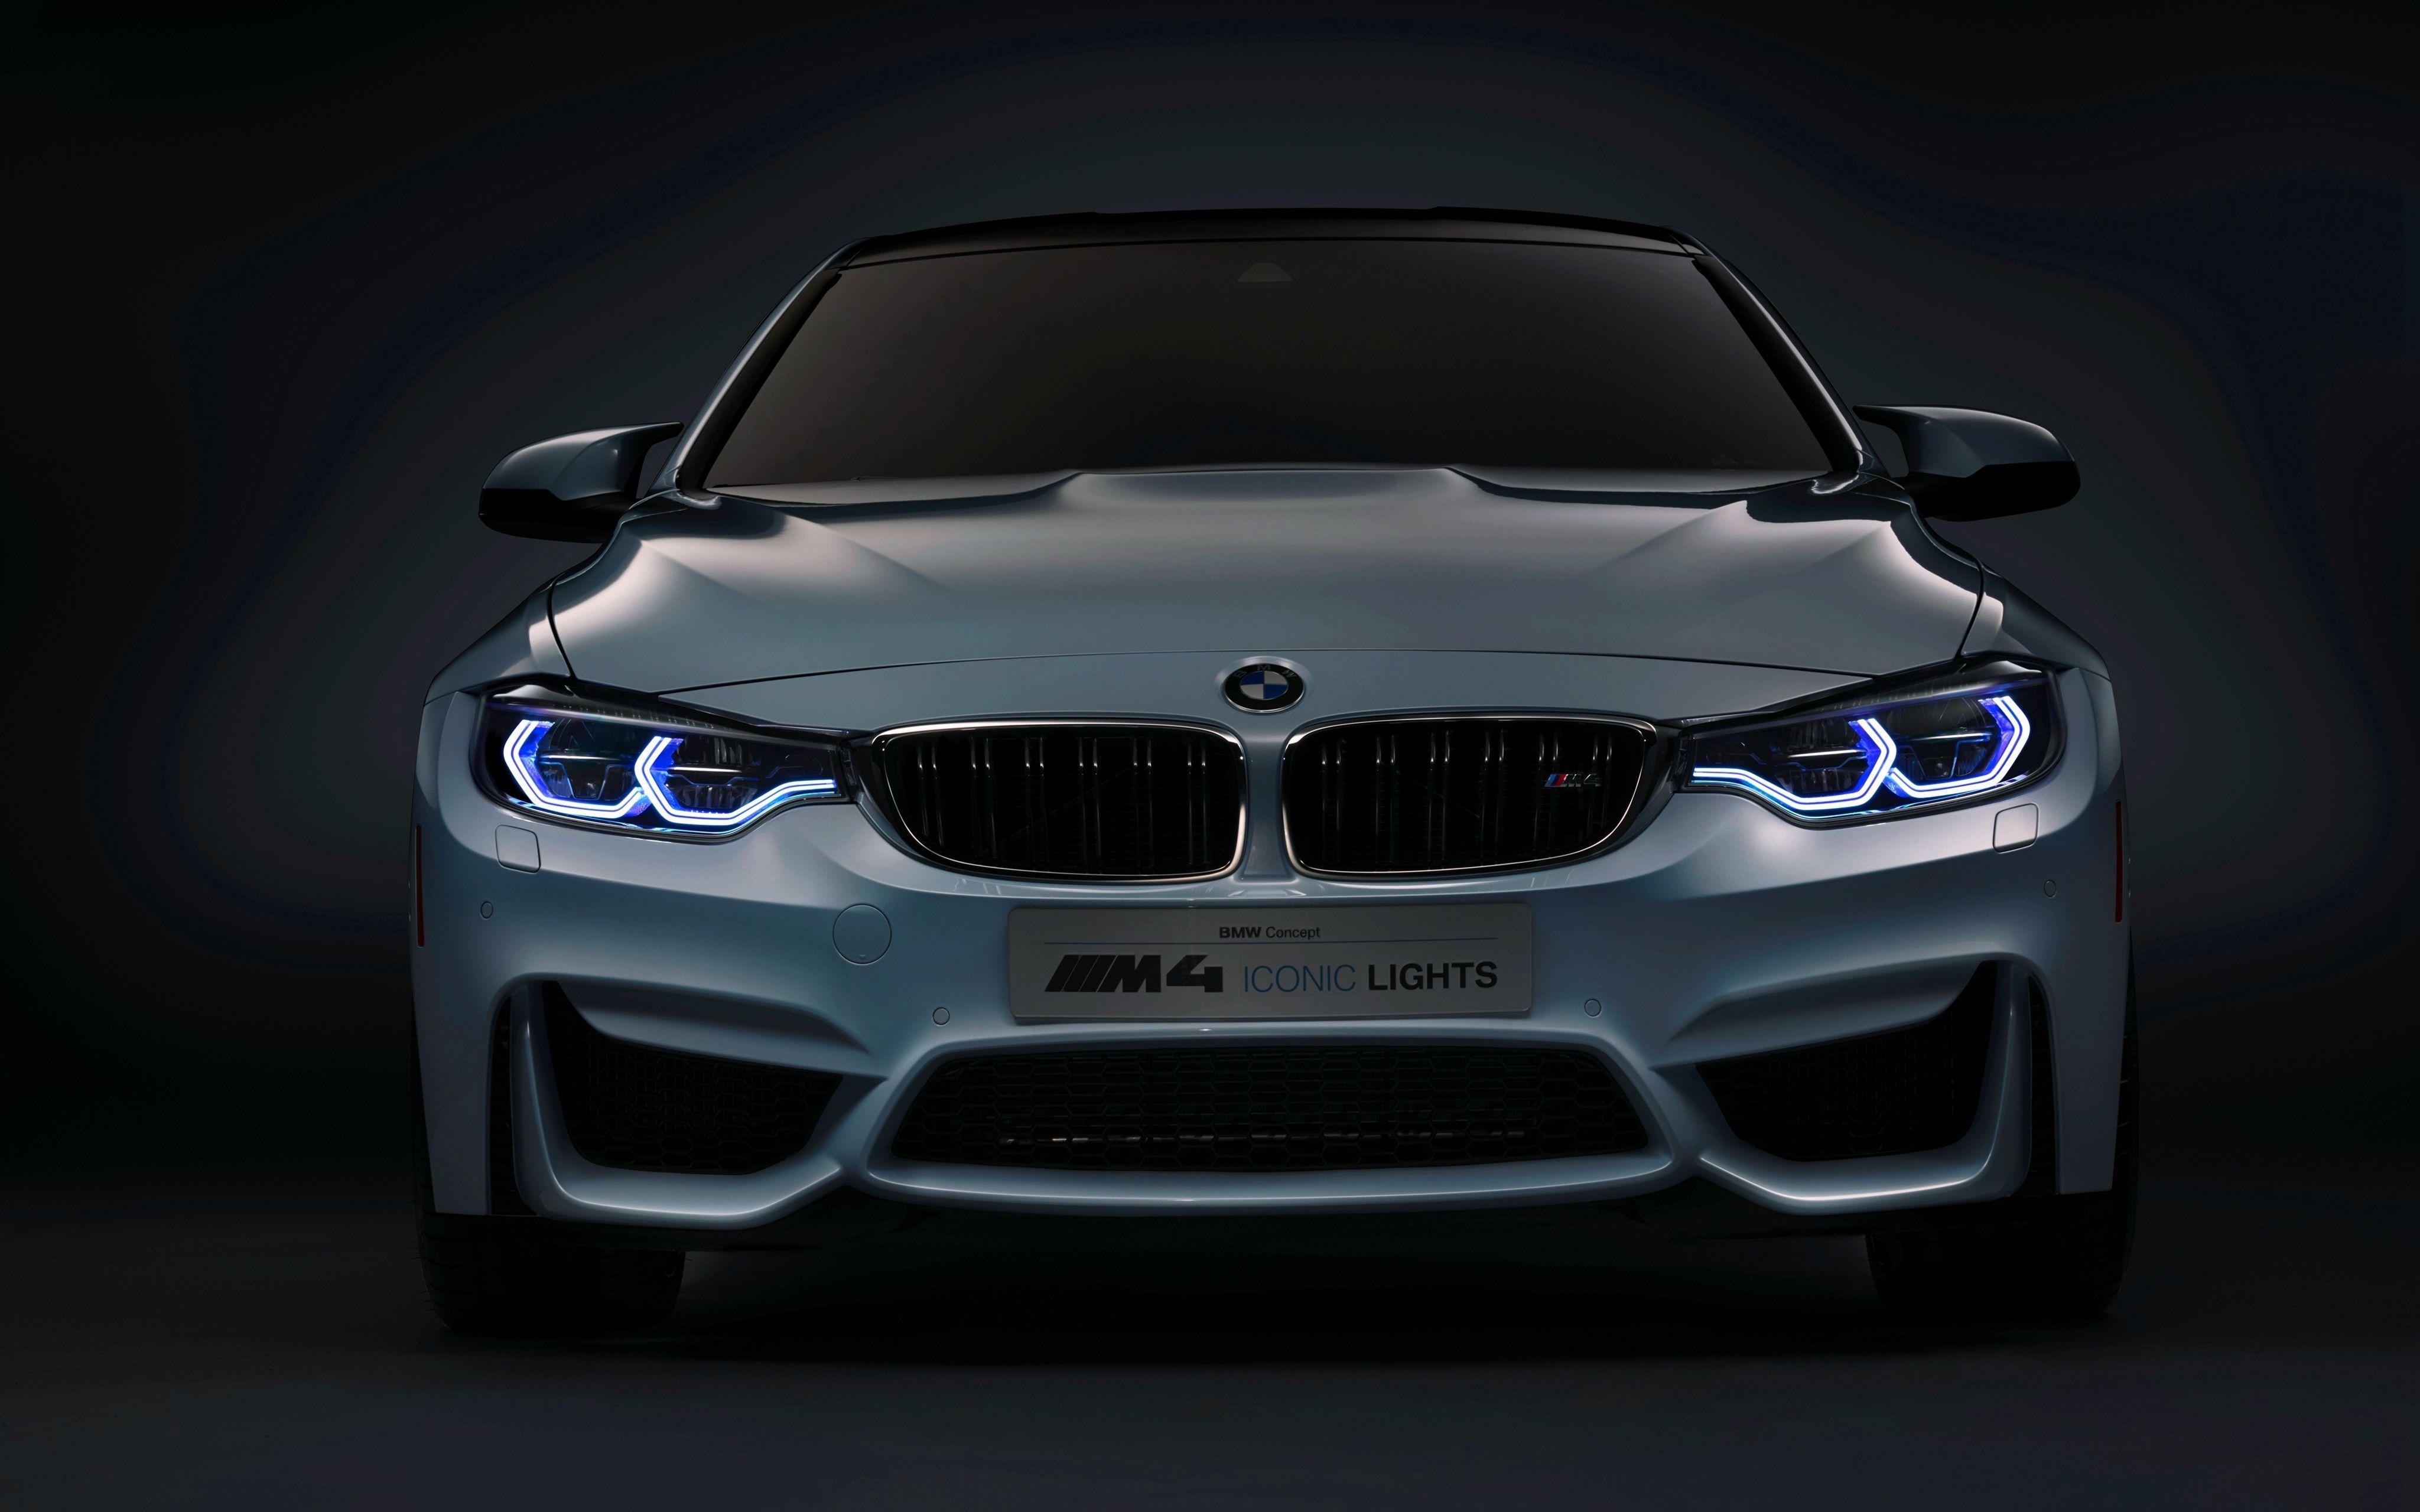 Wallpapers BMW M4, Iconic Lights, Concept, 4K, BMW, Automotive / Cars